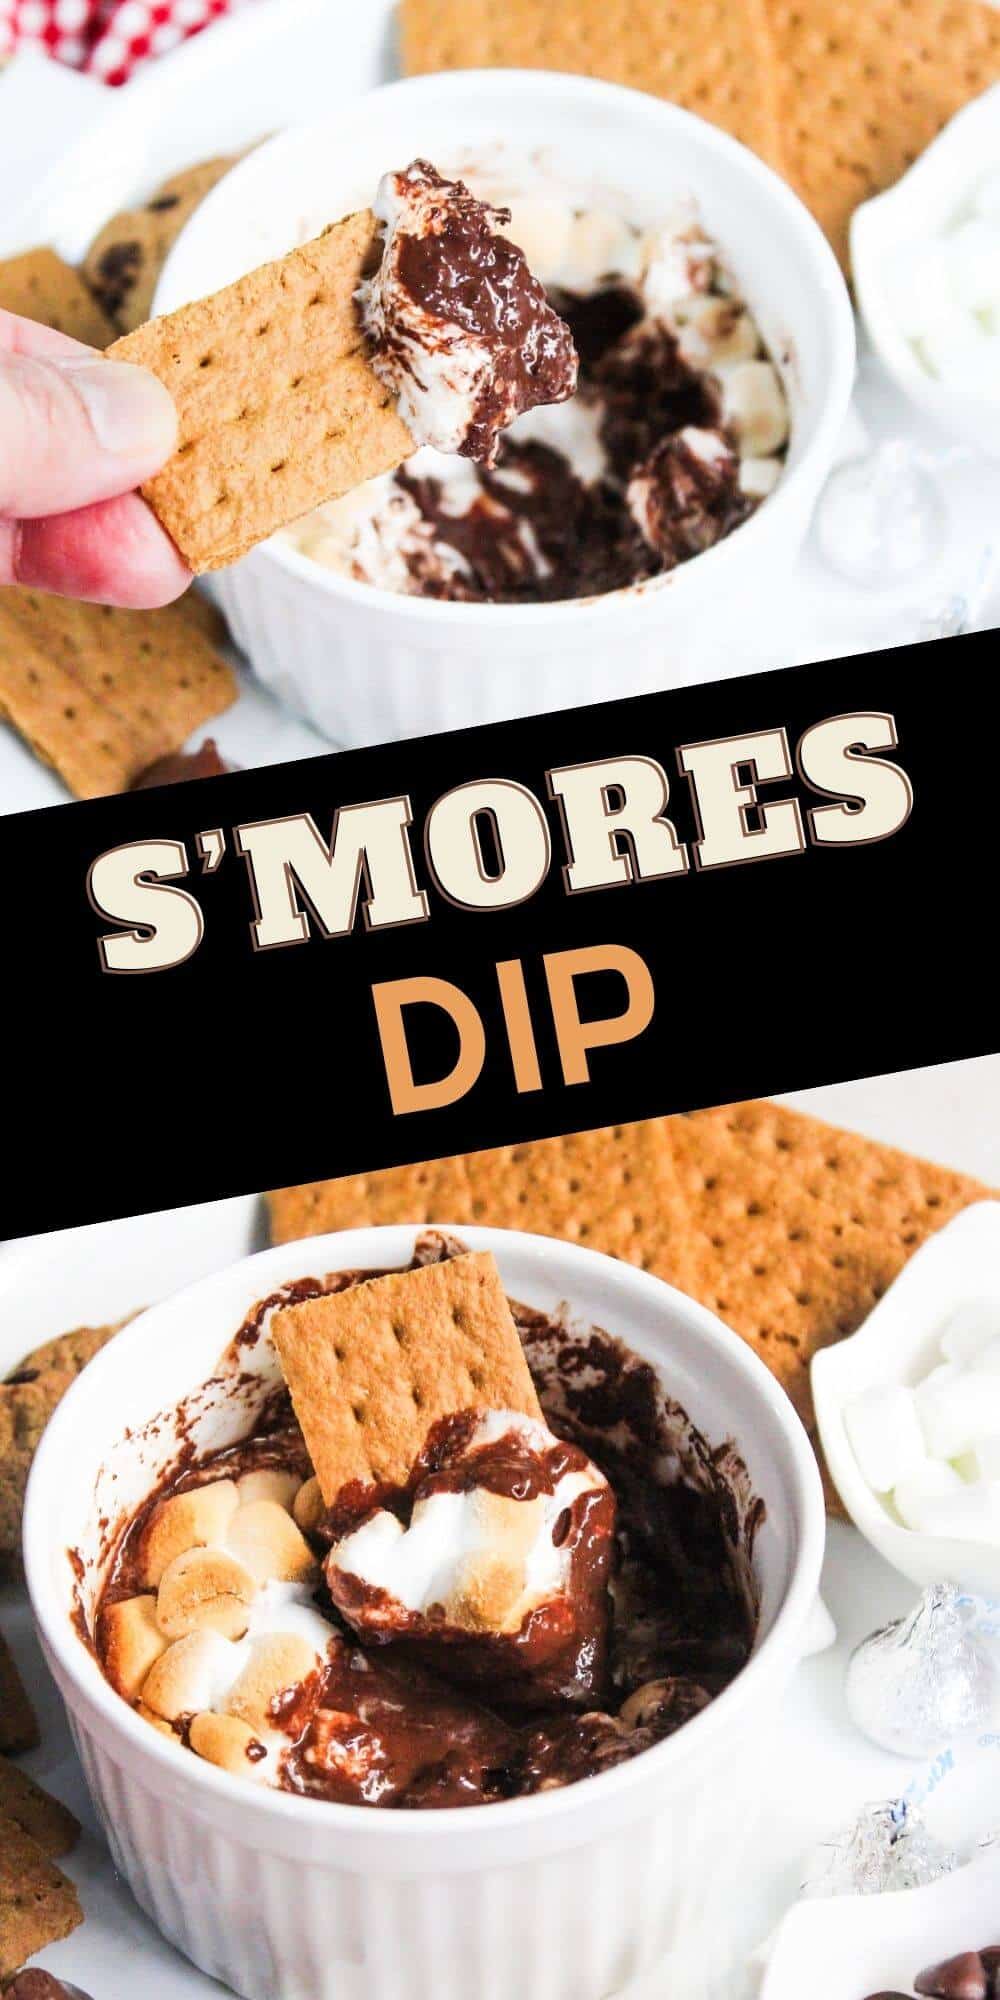 S'mores dip with graham crackers and marshmallows.